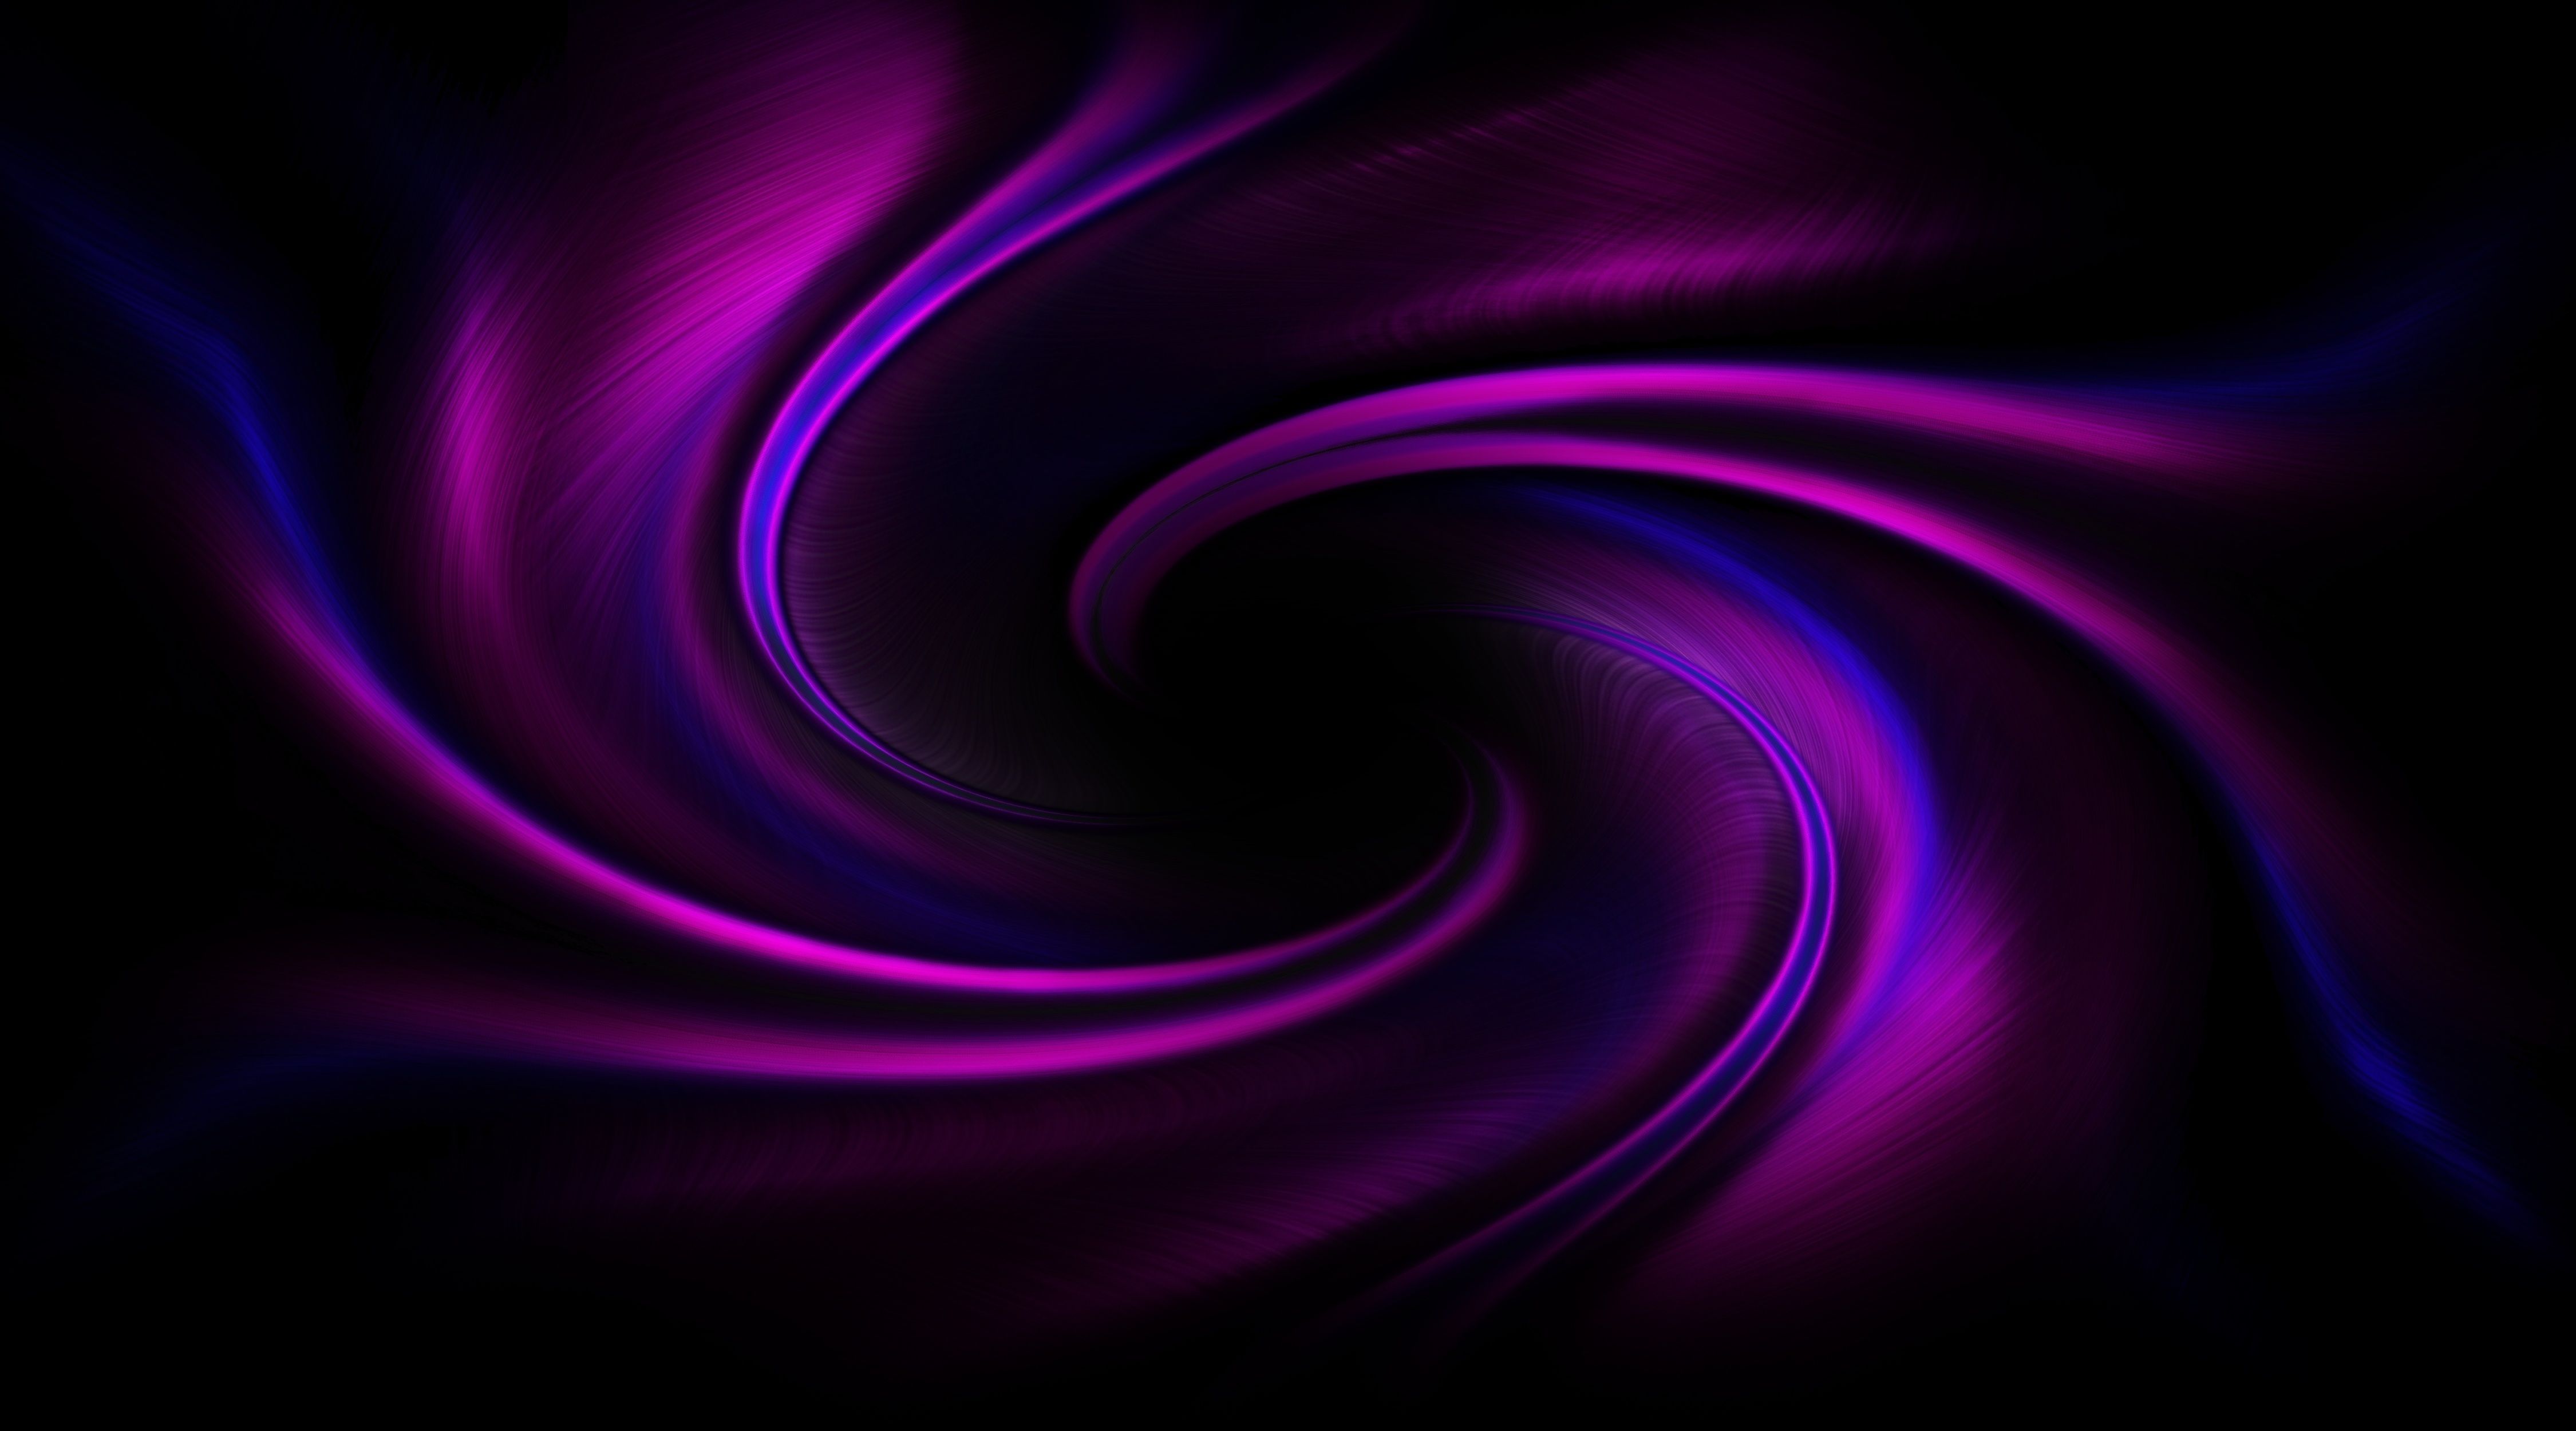 purple blue and black backgrounds